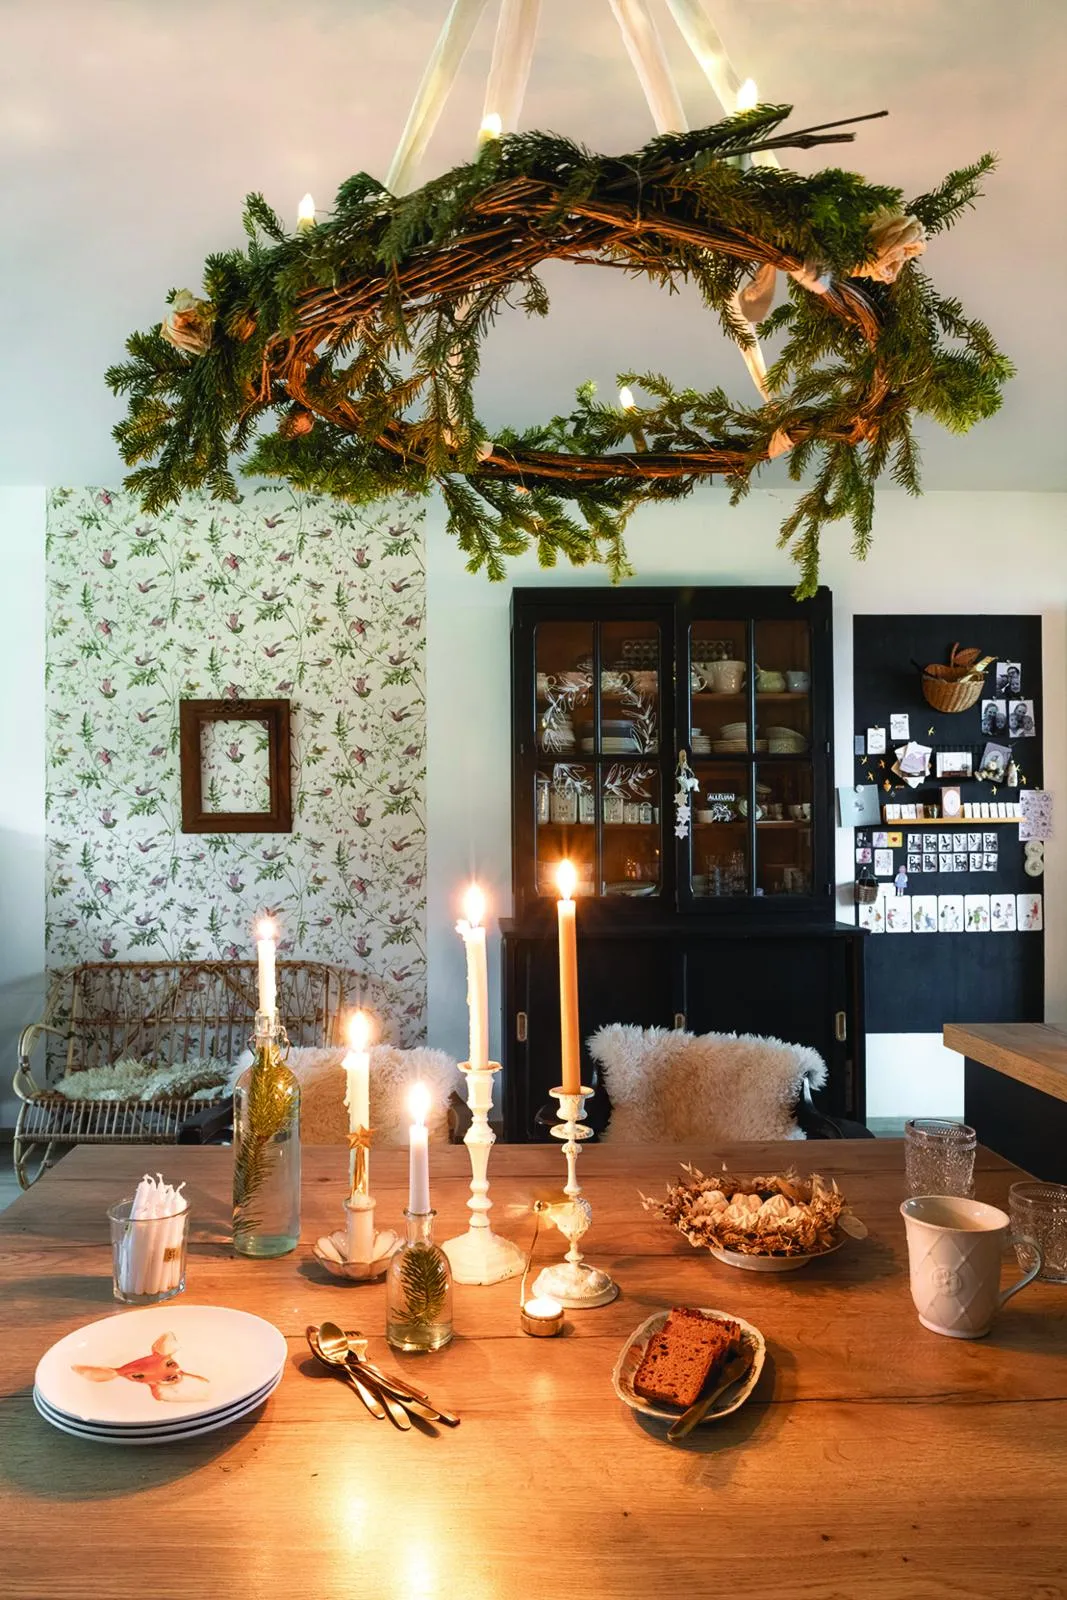 French converted barn wreath above table